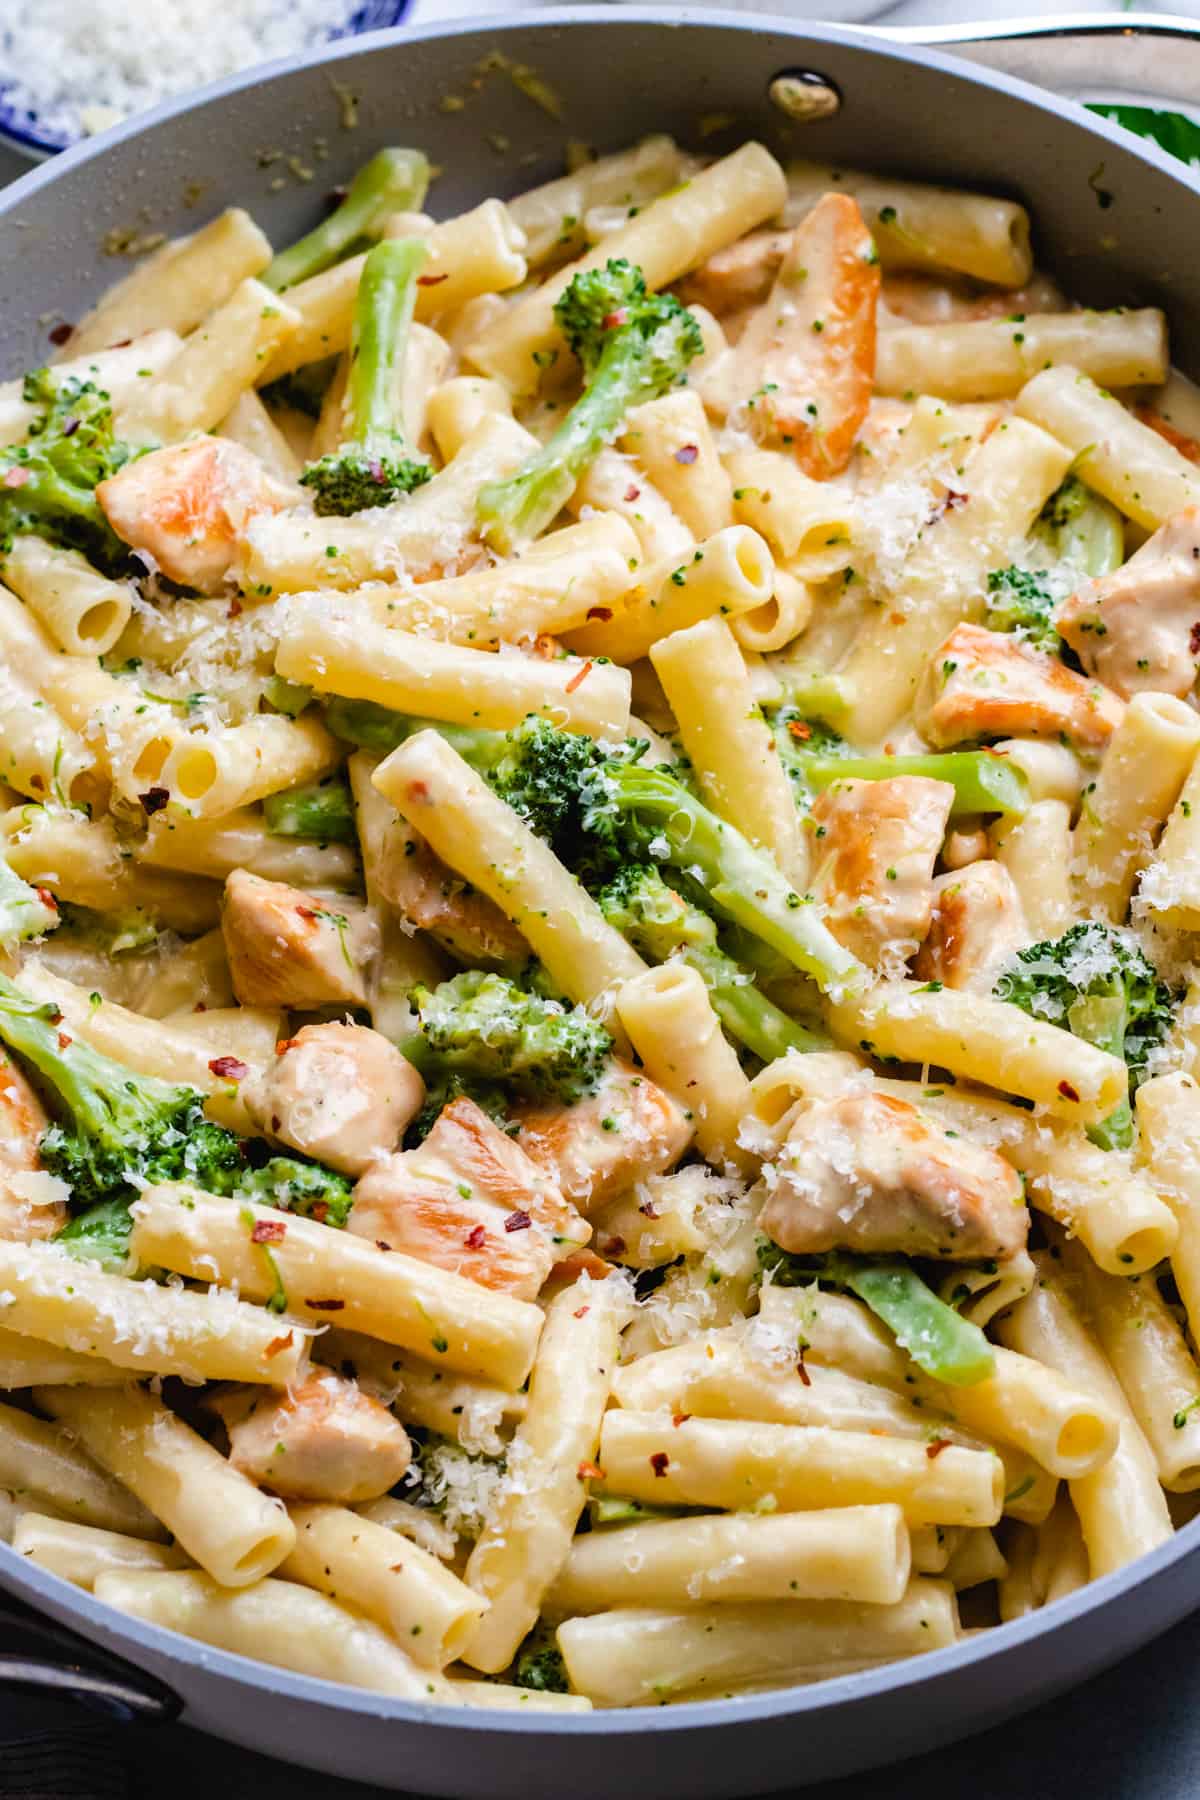 Pasta, diced chicken, and broccolli in creamy sauce.